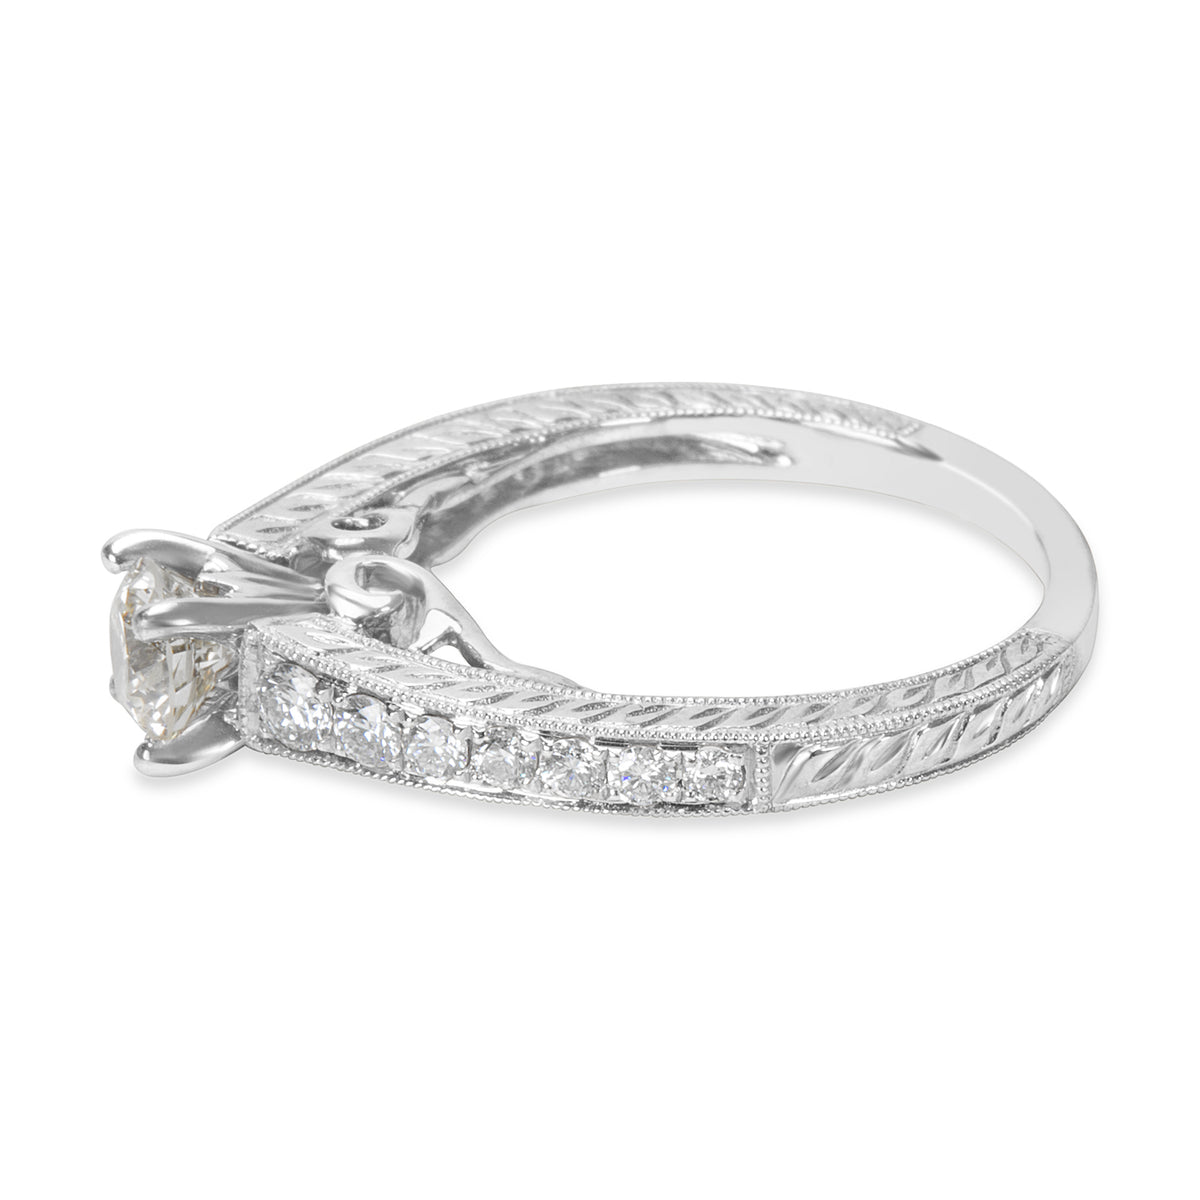 BRAND NEW Diamond Engagement Ring in 14K White Gold L-M SI2 (0.95 CTW)